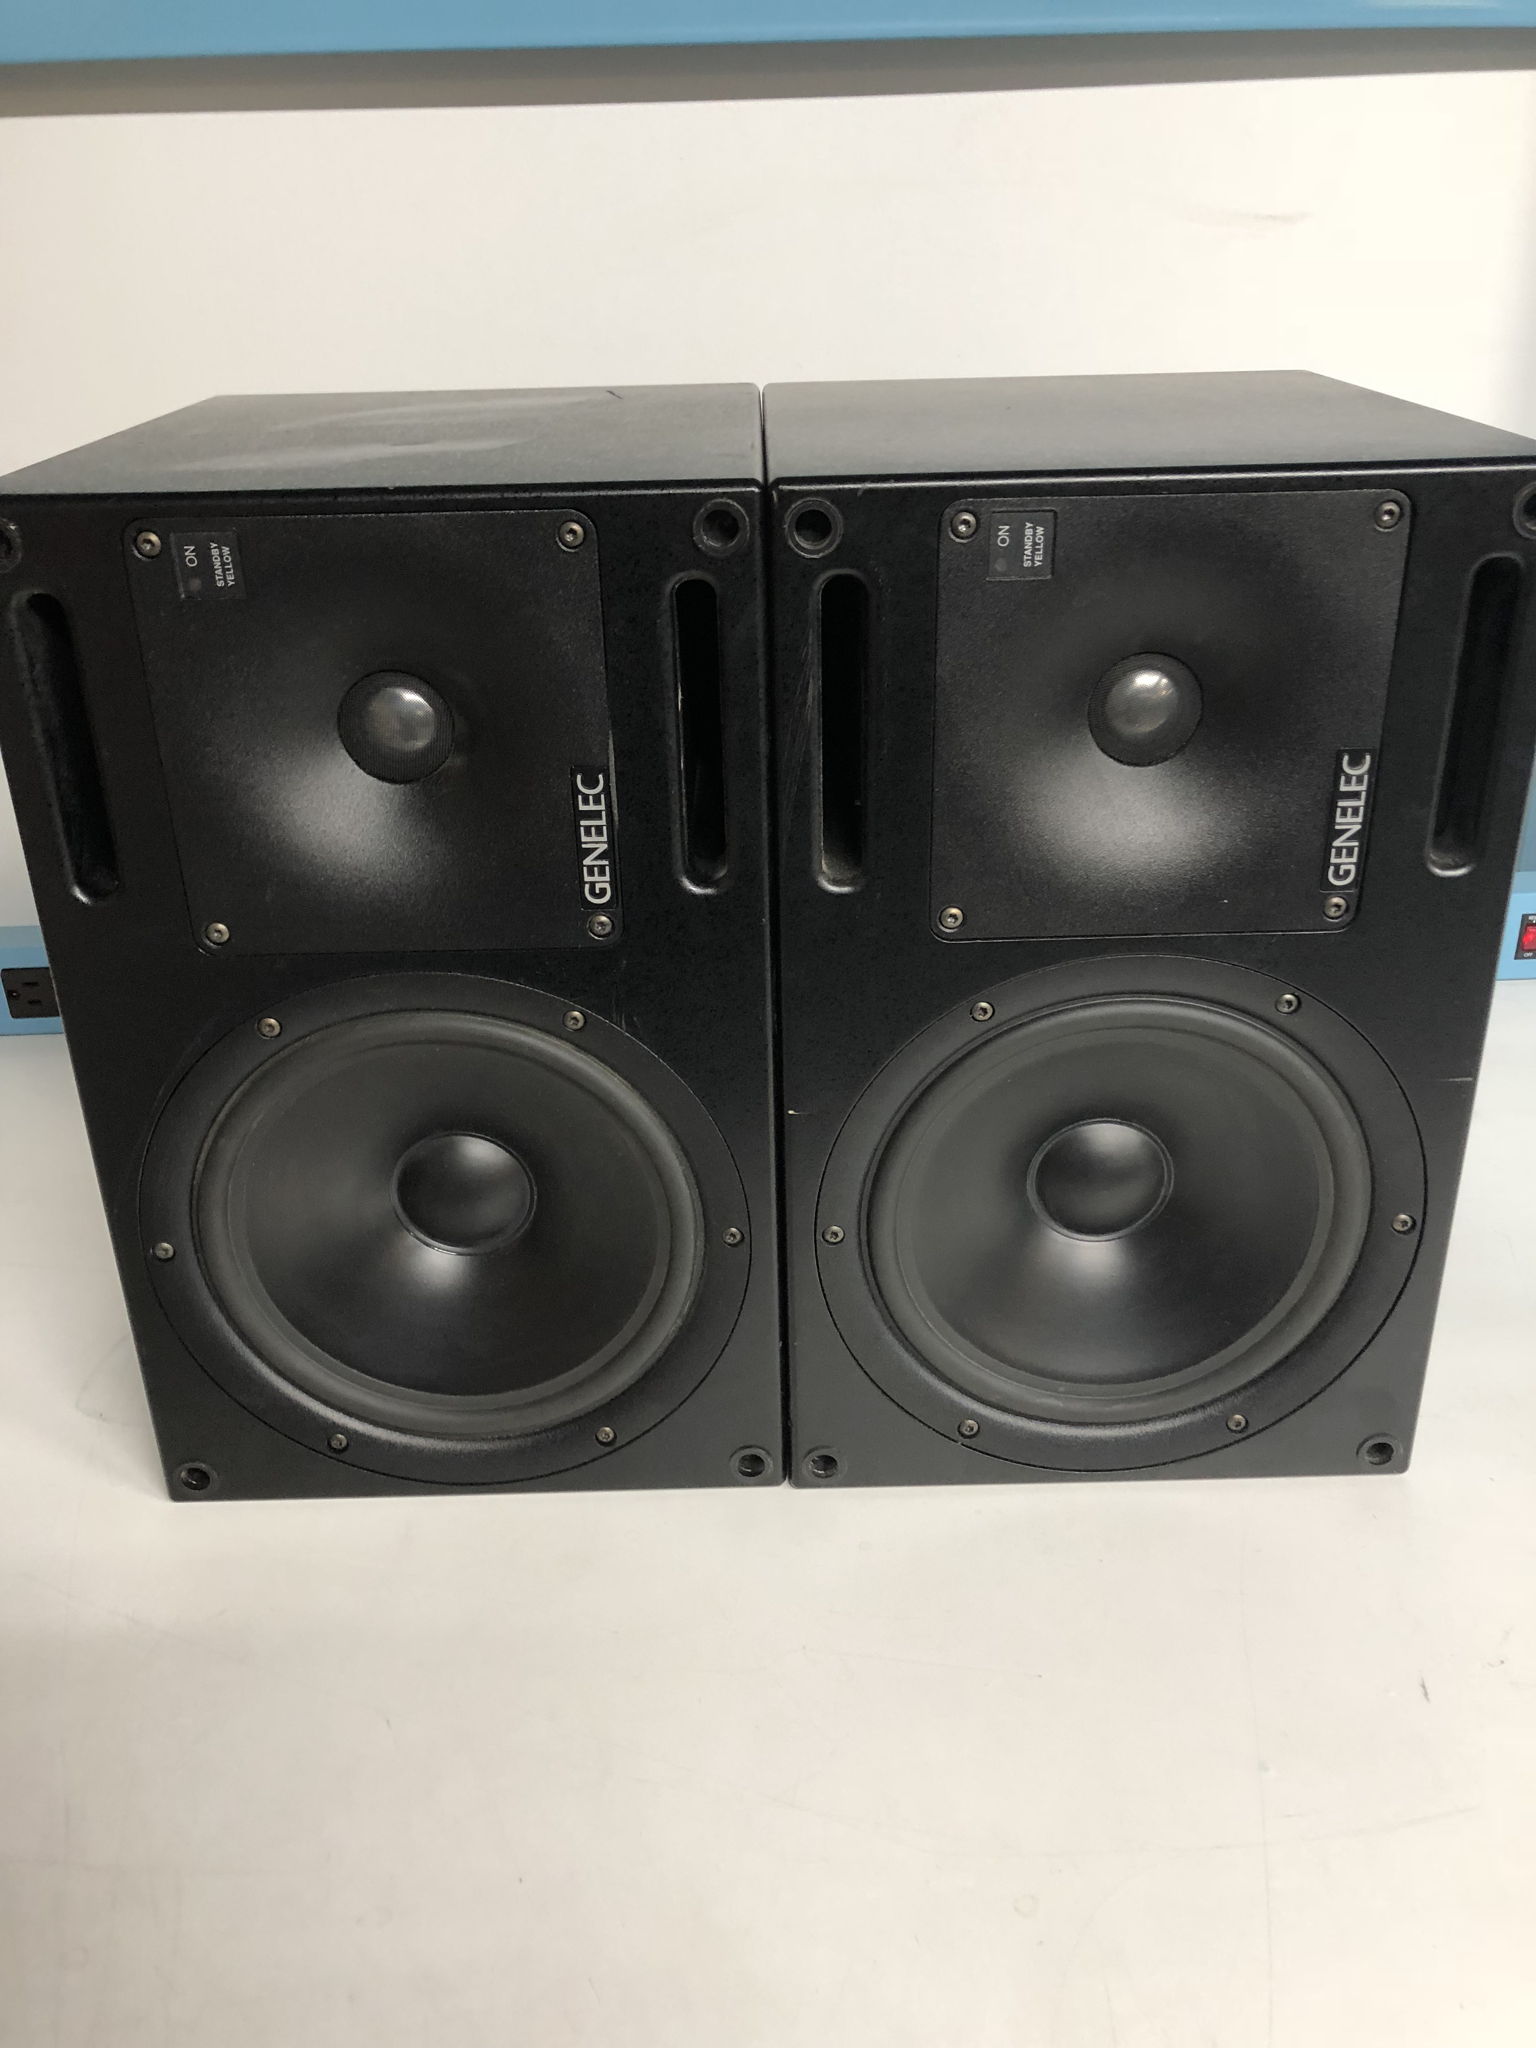 Pair of Genelec HT208 monitors / speakers - I also have...